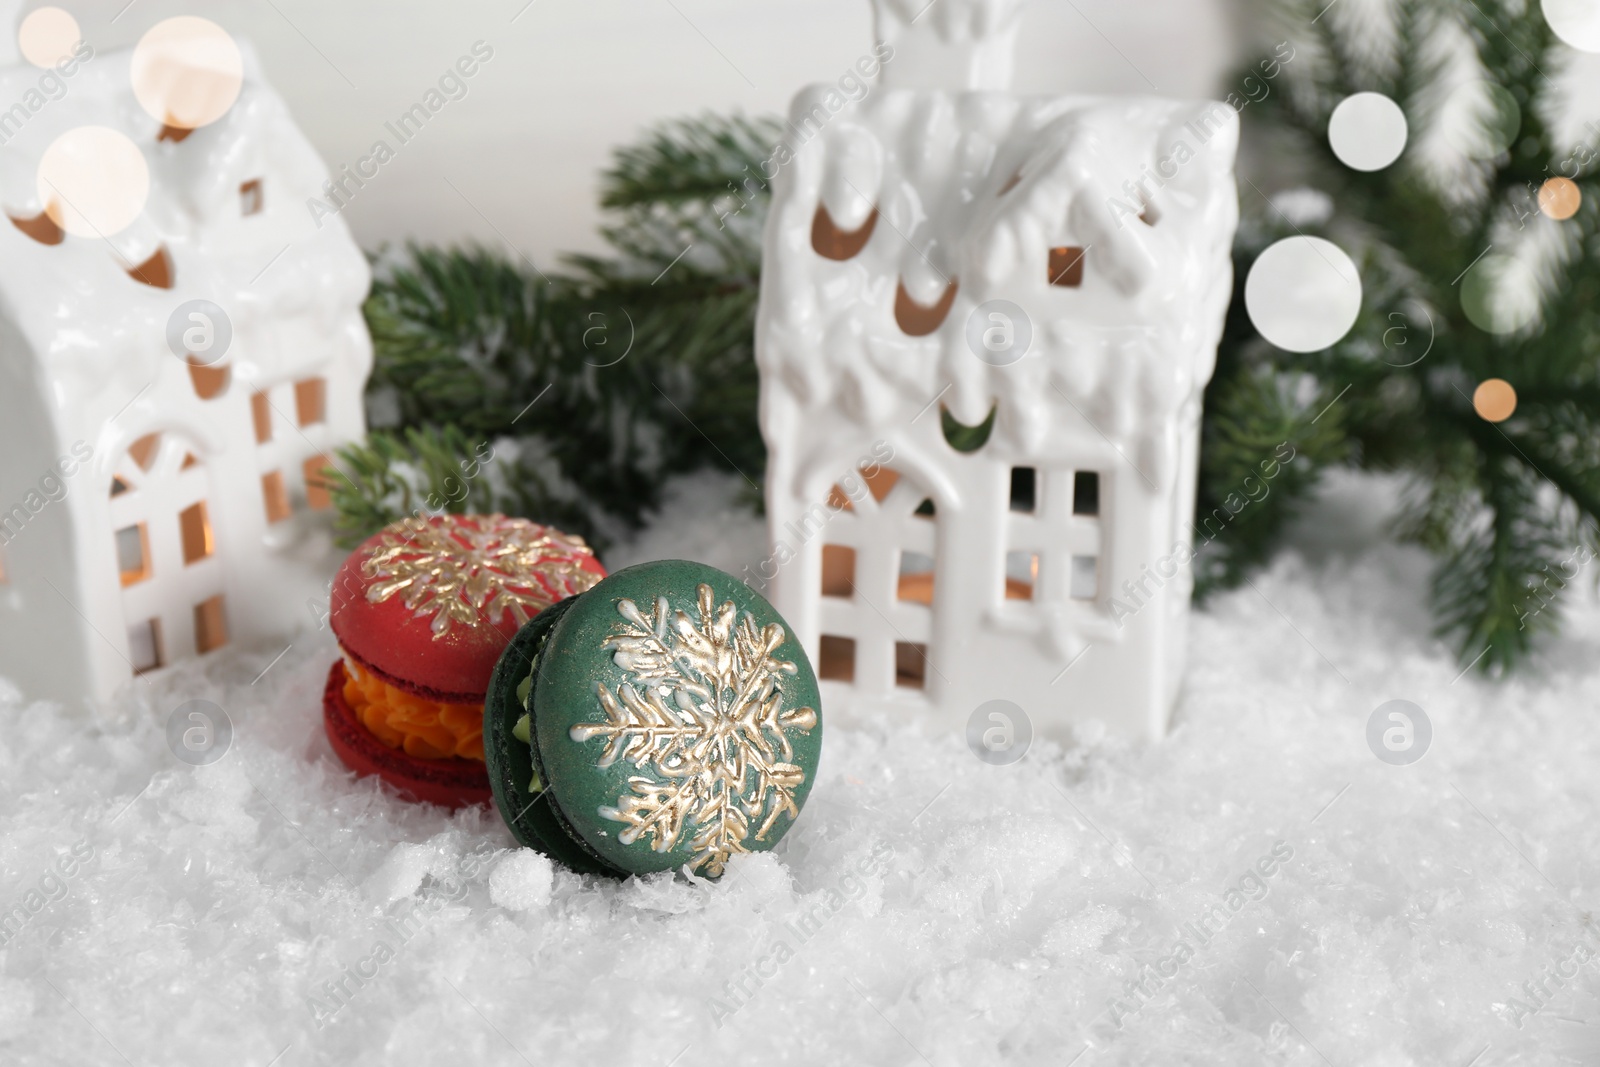 Photo of Different decorated Christmas macarons on table with artificial snow, space for text